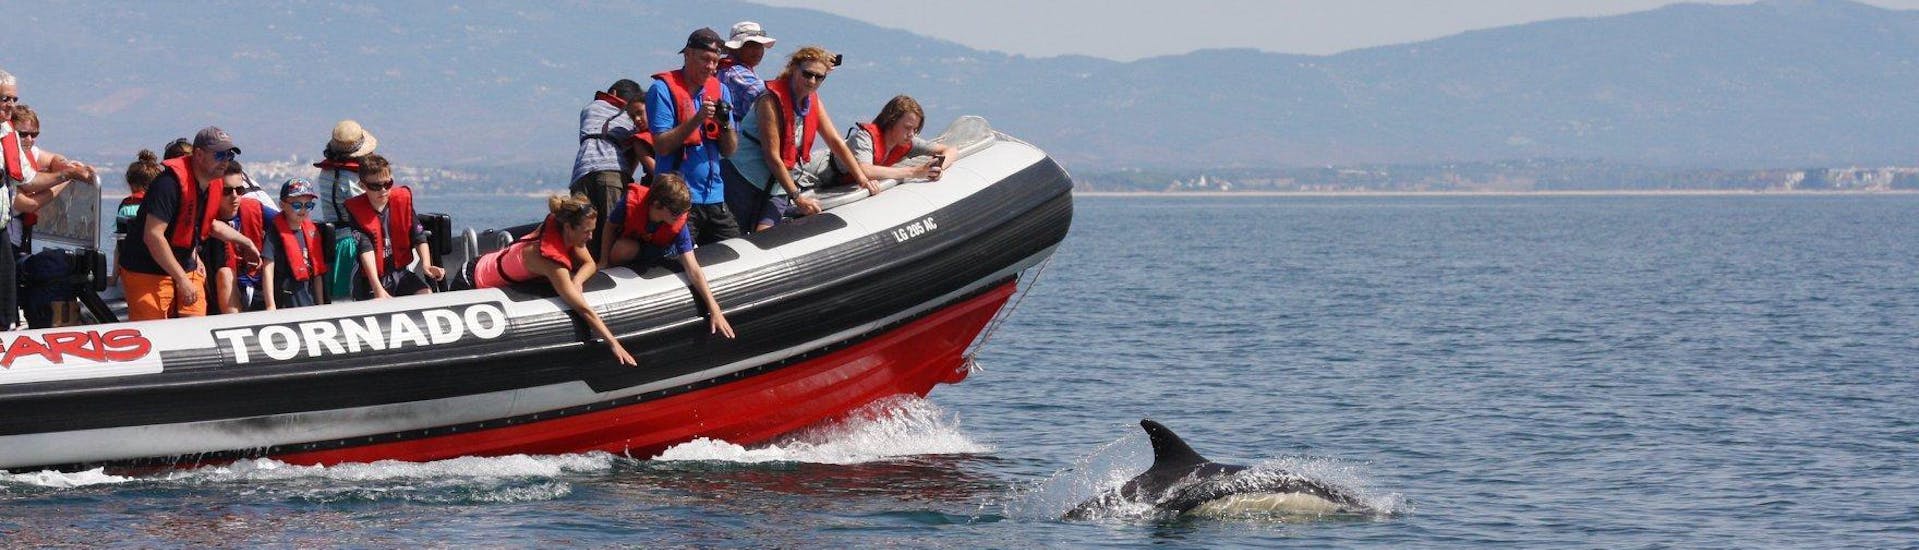 During a dolphin watching boat trip in Portimao with Seafaris Algarve, visitors are admiring the friendly animals from the boat.